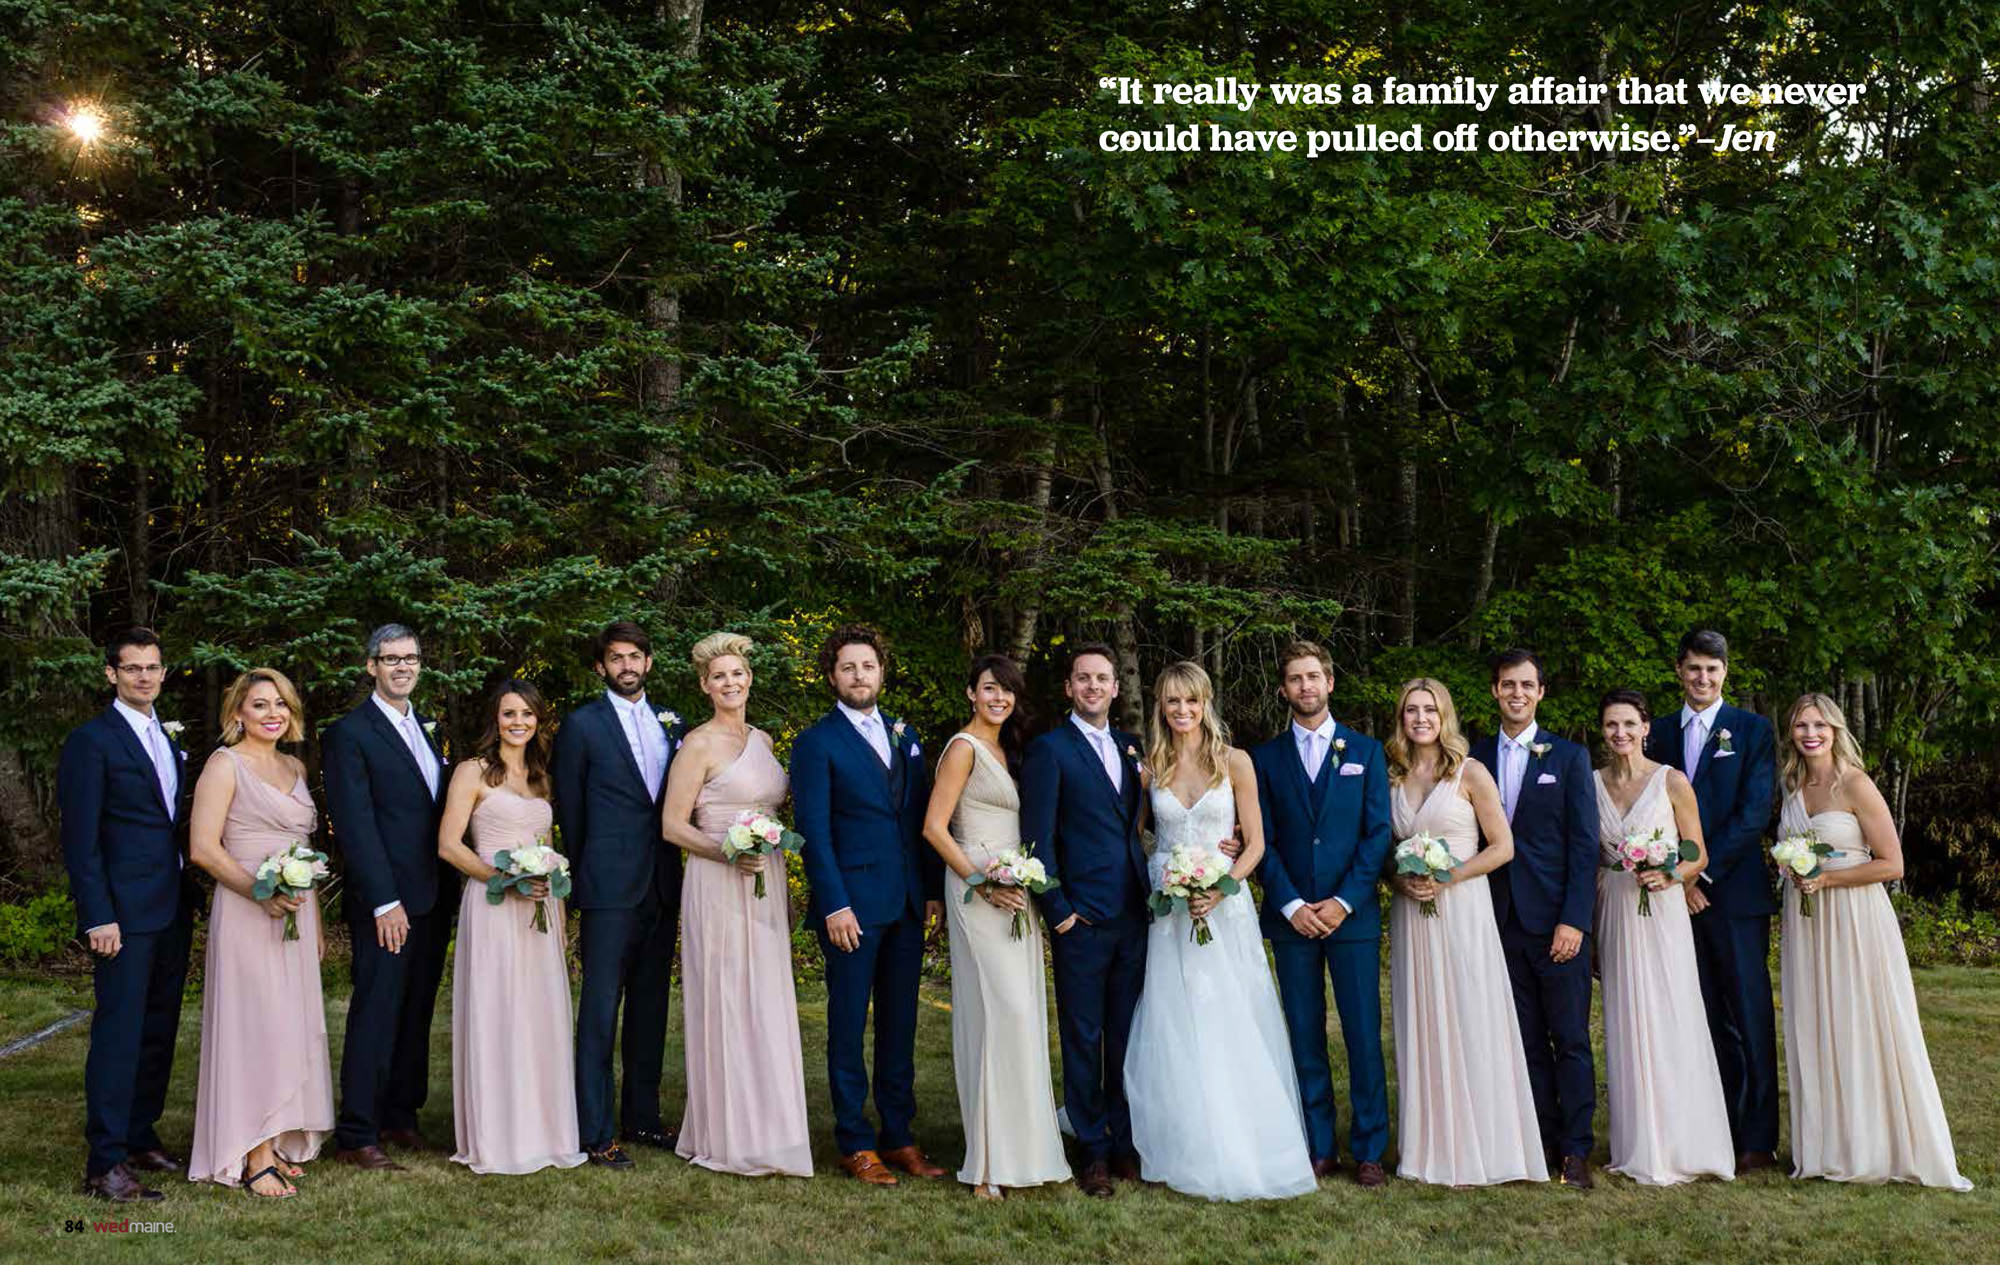 A Bar Harbor wedding at the Pot & Kettle Club was published in Maine Magazine 2017 wedding guide